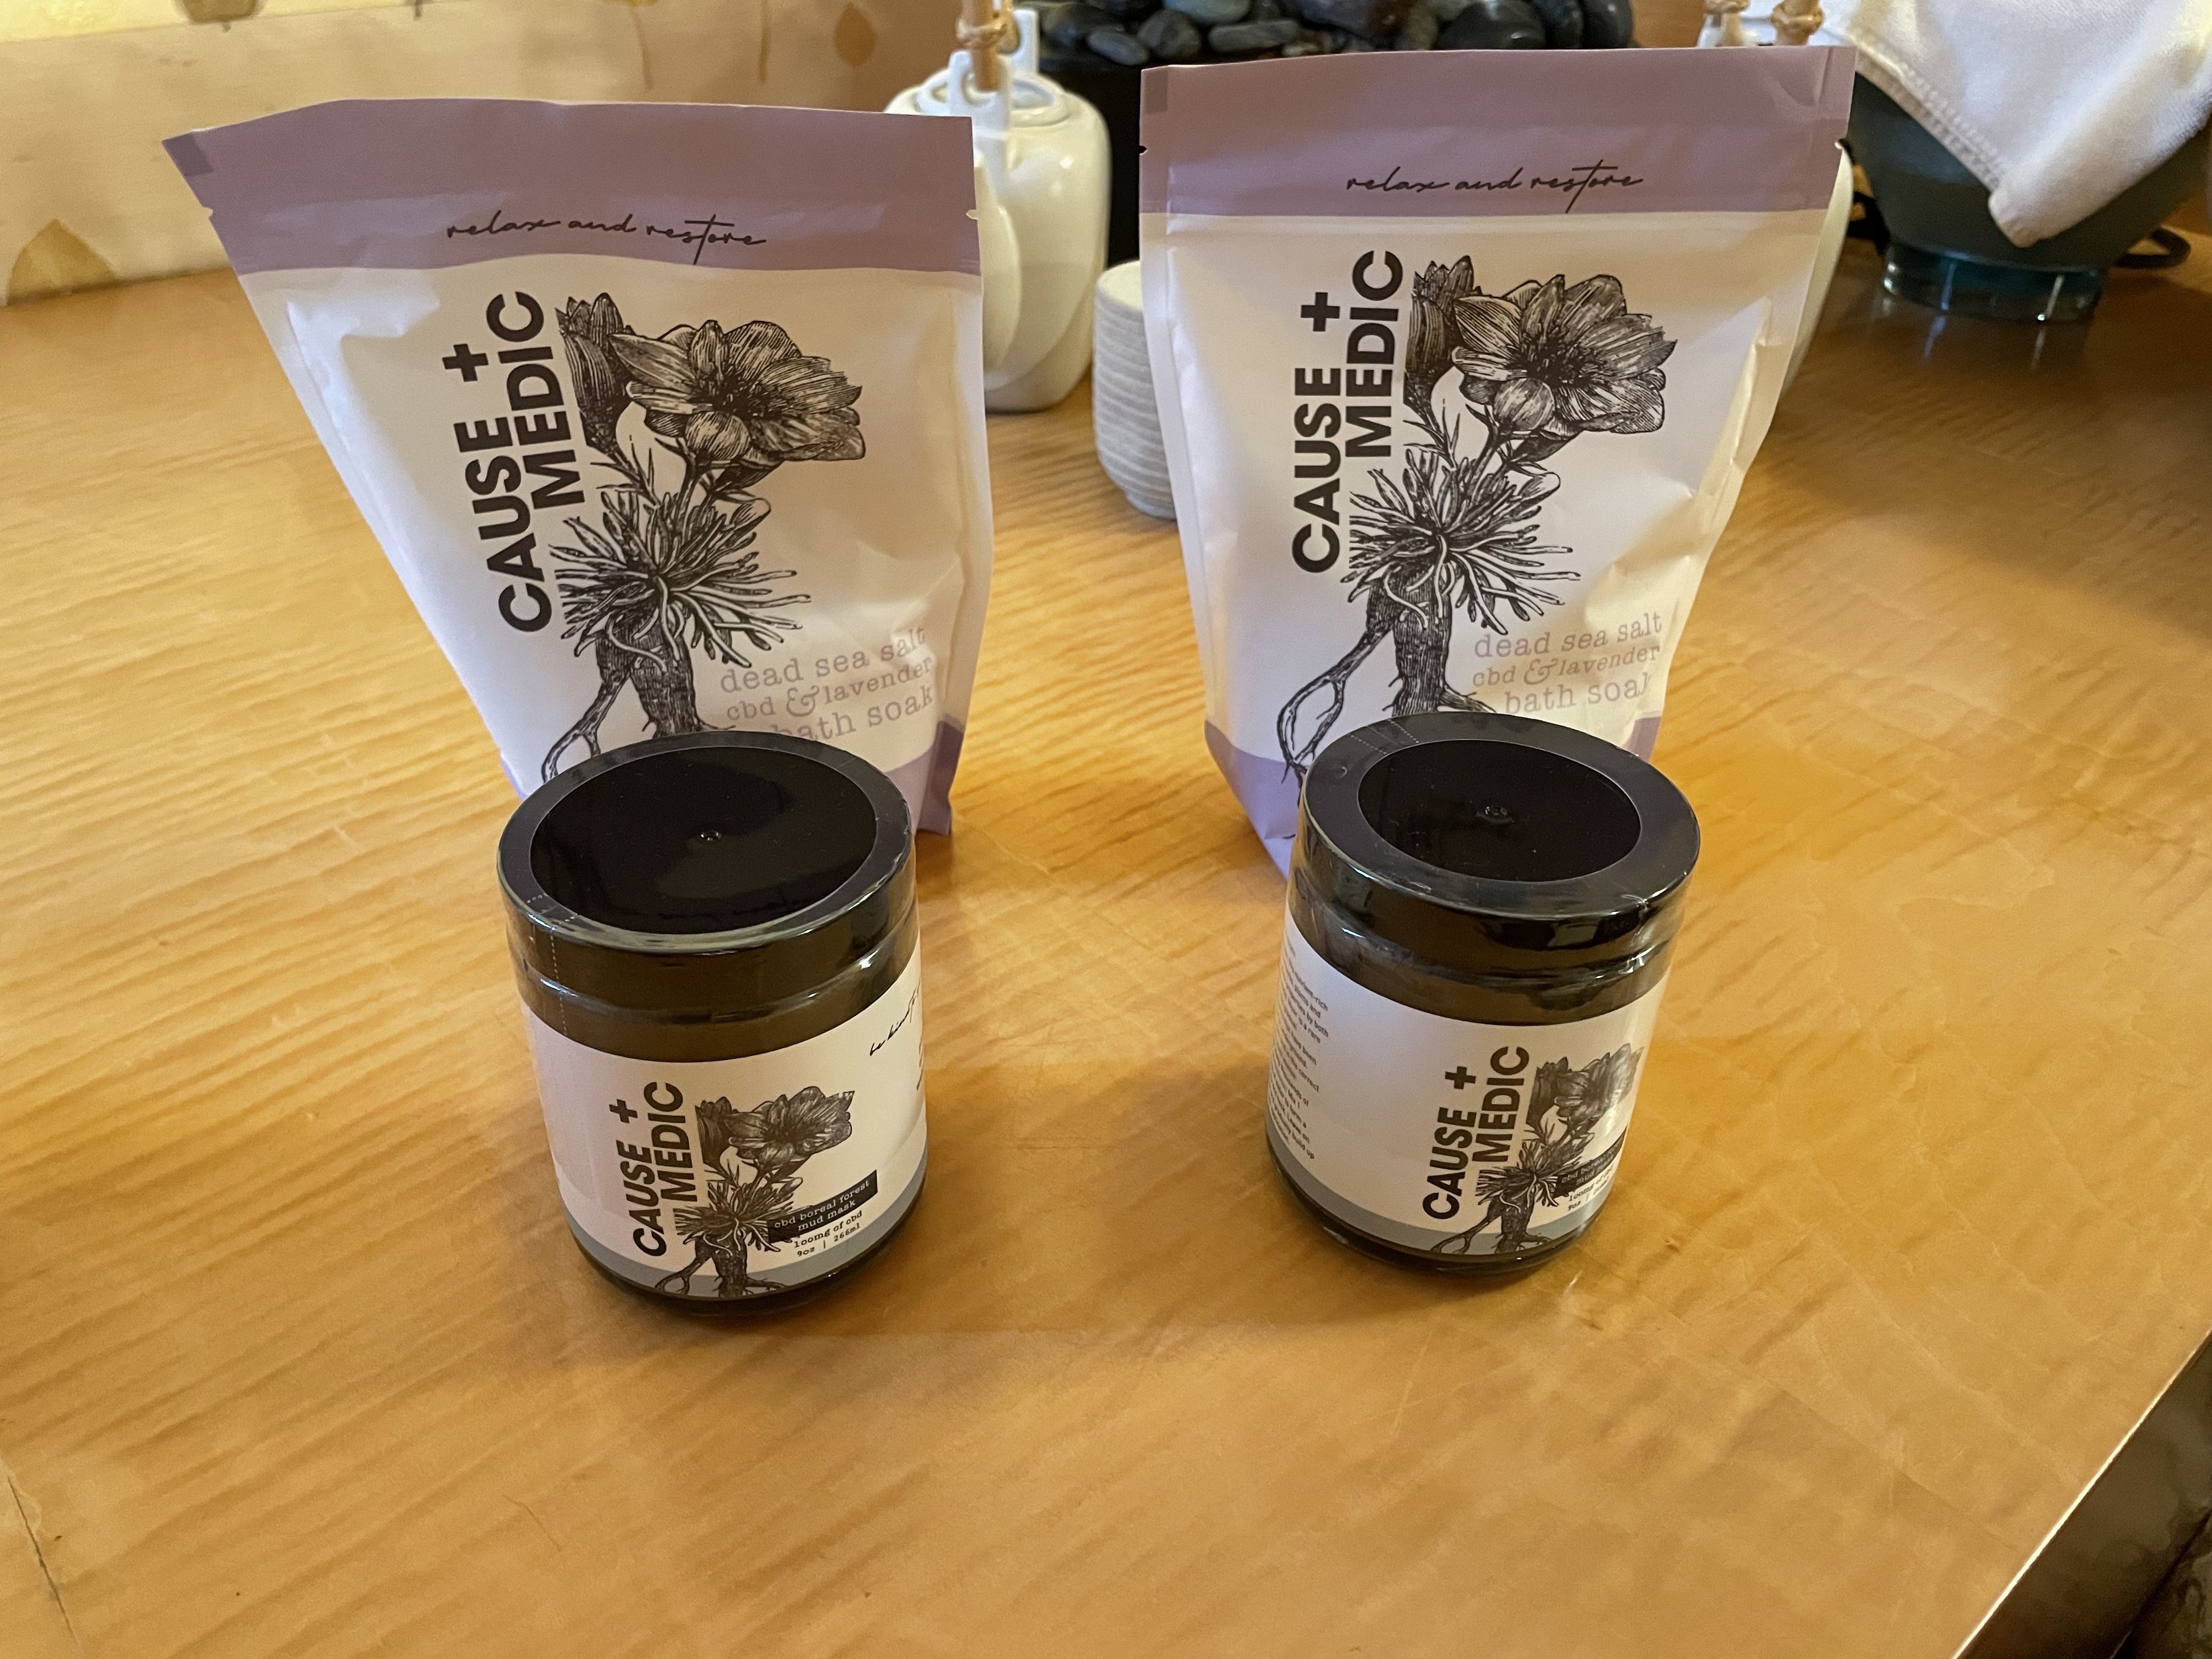 Two small containers are labeled "cbd boreal forest mud mask," and behind are two bags labeled dead sea salt cbd and lavender bath soak.